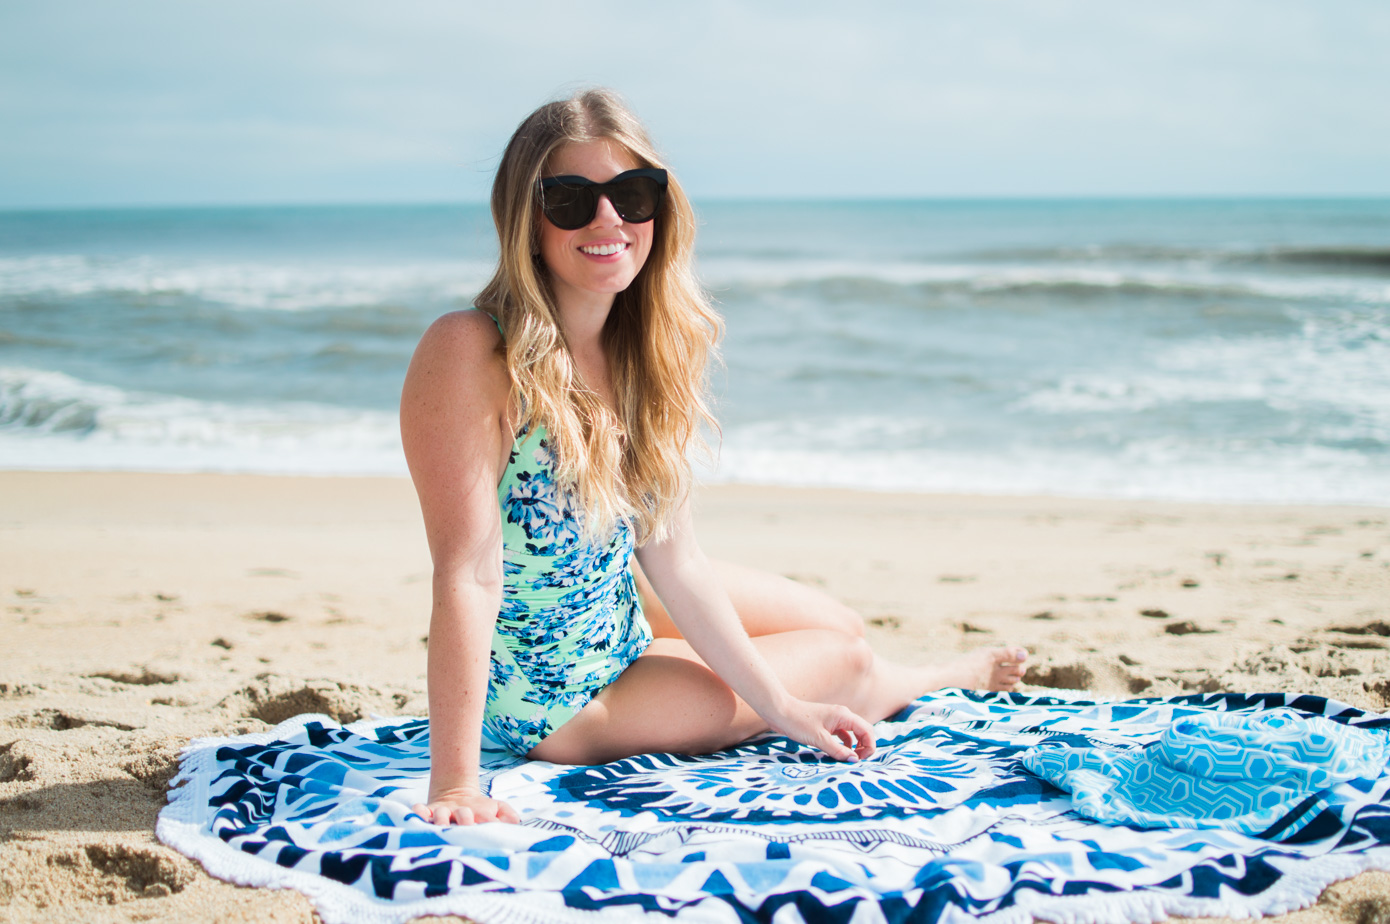 Floral One Piece Swimsuit // What to Wear to the Beach // Louella Reese Life & Style Blog